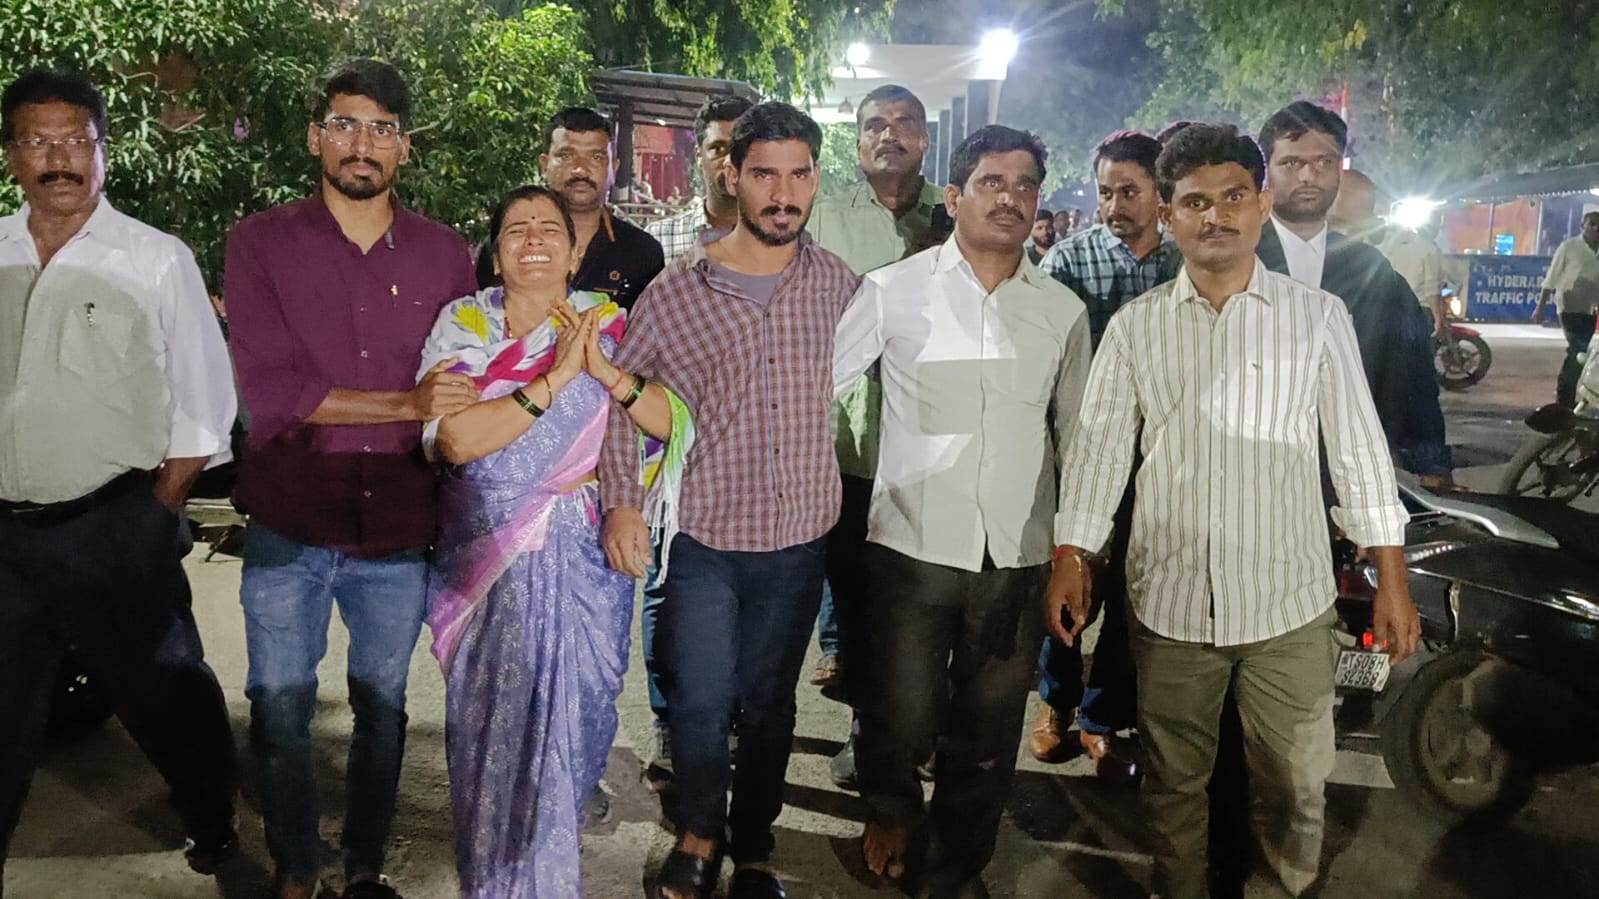 The accused, Shivaram Rathod, with his mother and others at the court on Friday. (Supplied)